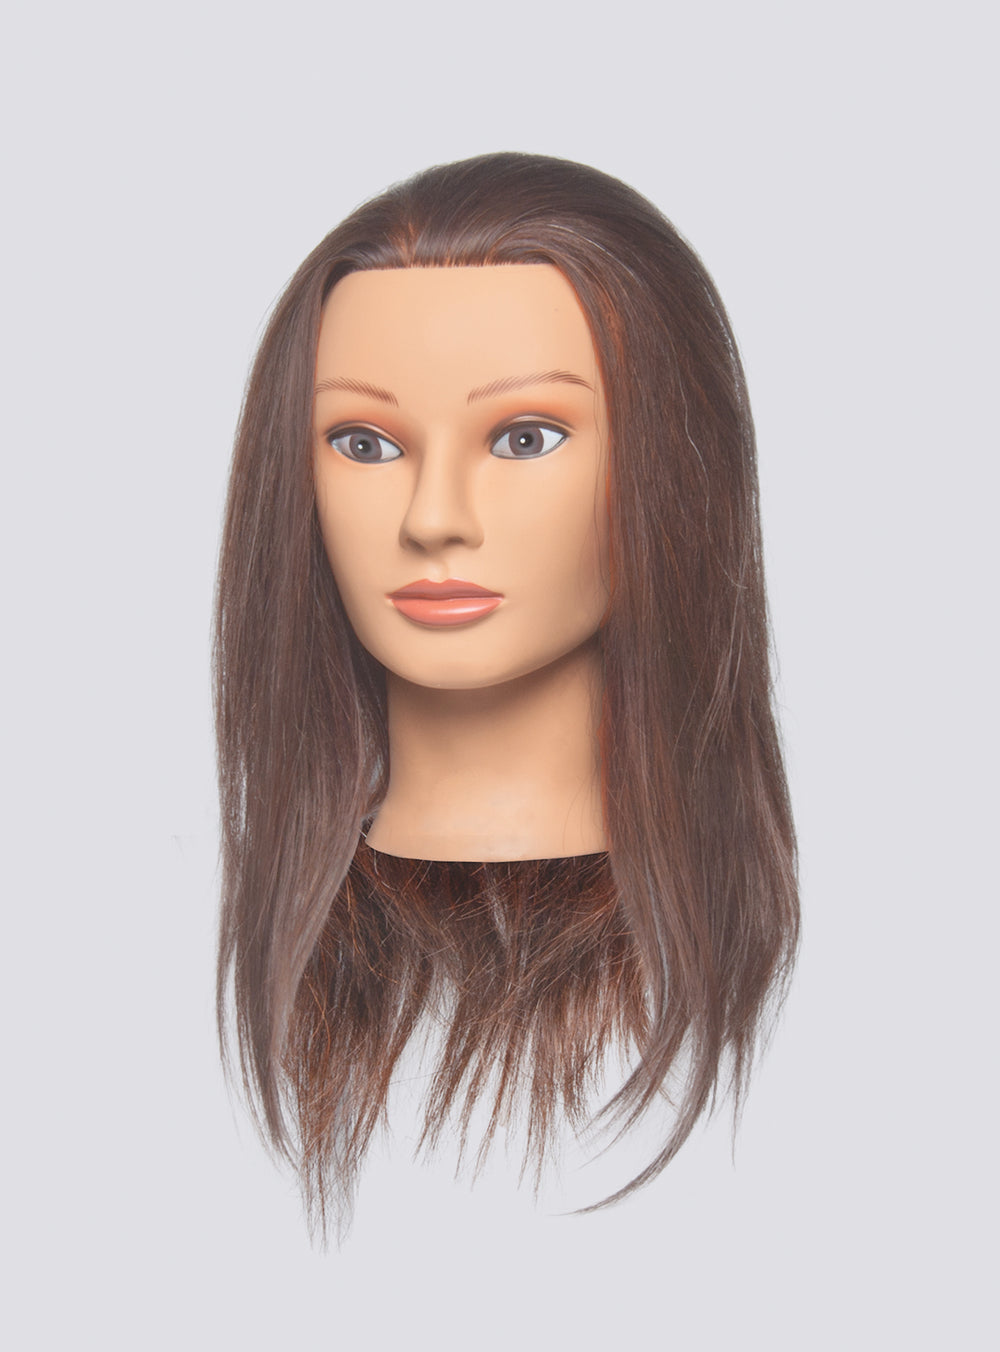 Used Mannequin Heads